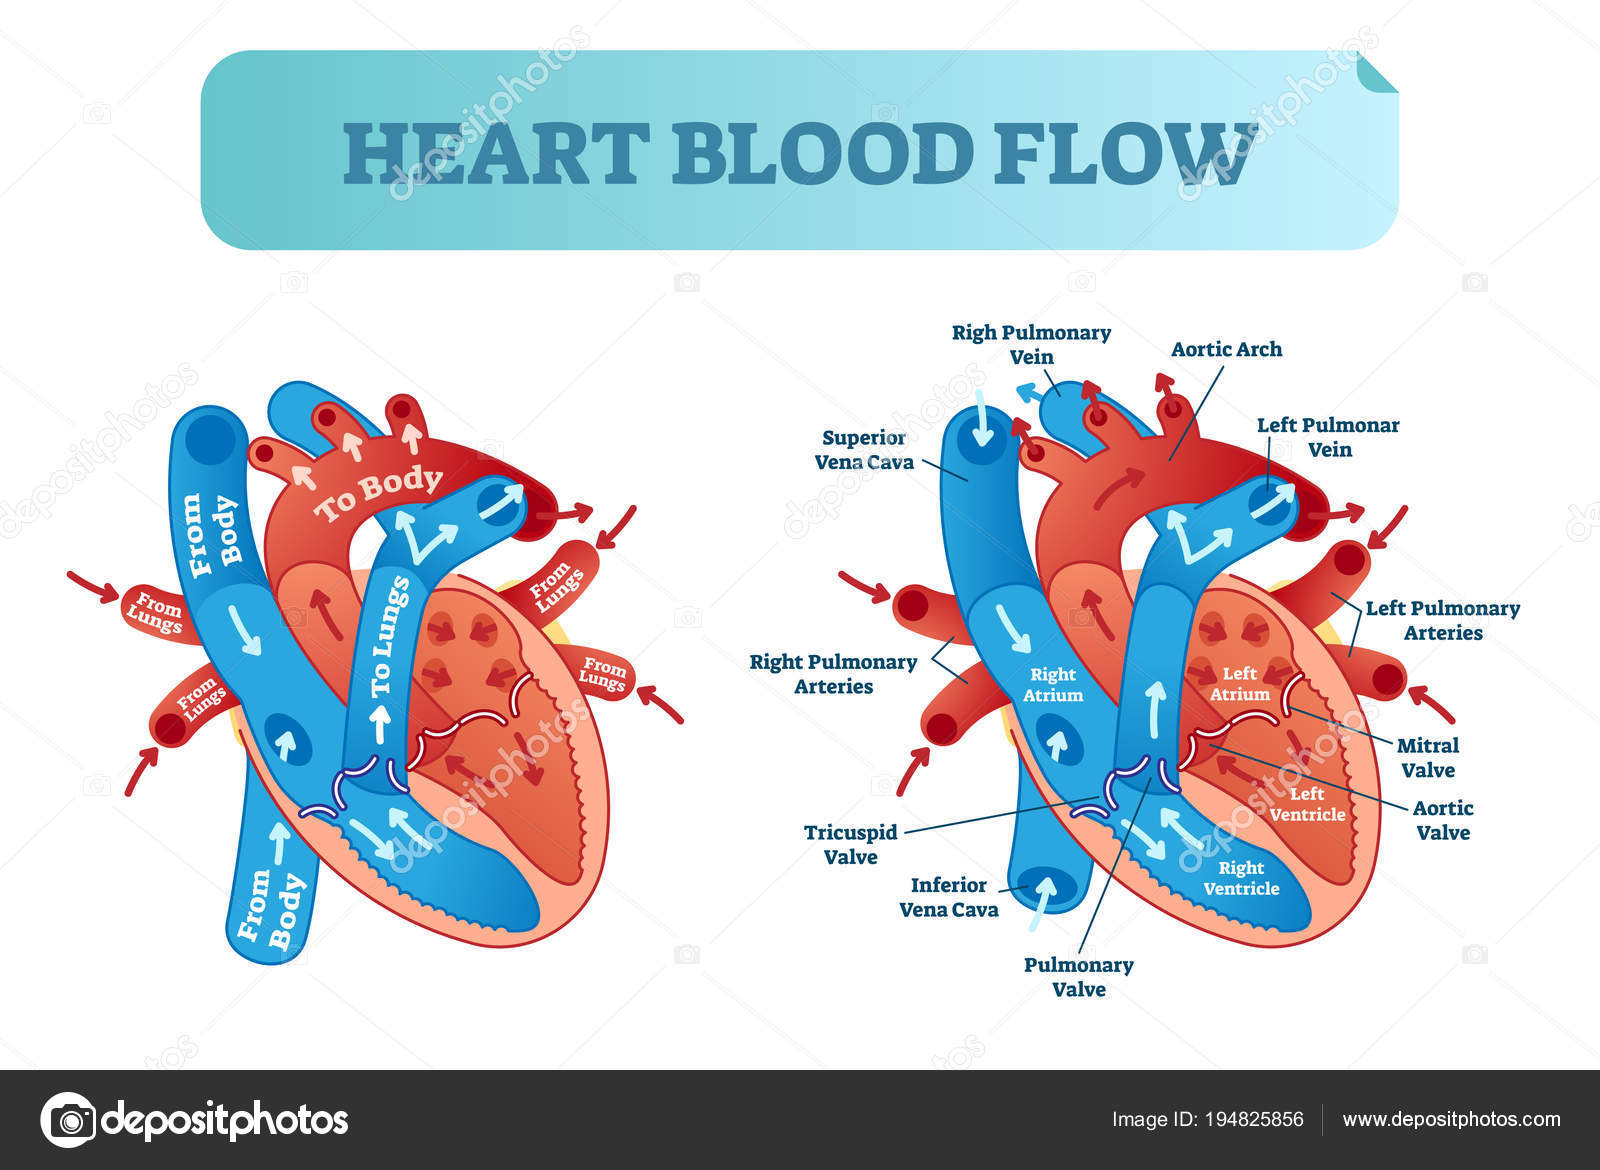 Heart Blood Flow Diagram Heart Blood Flow Circulation Anatomical Diagram With Atrium And